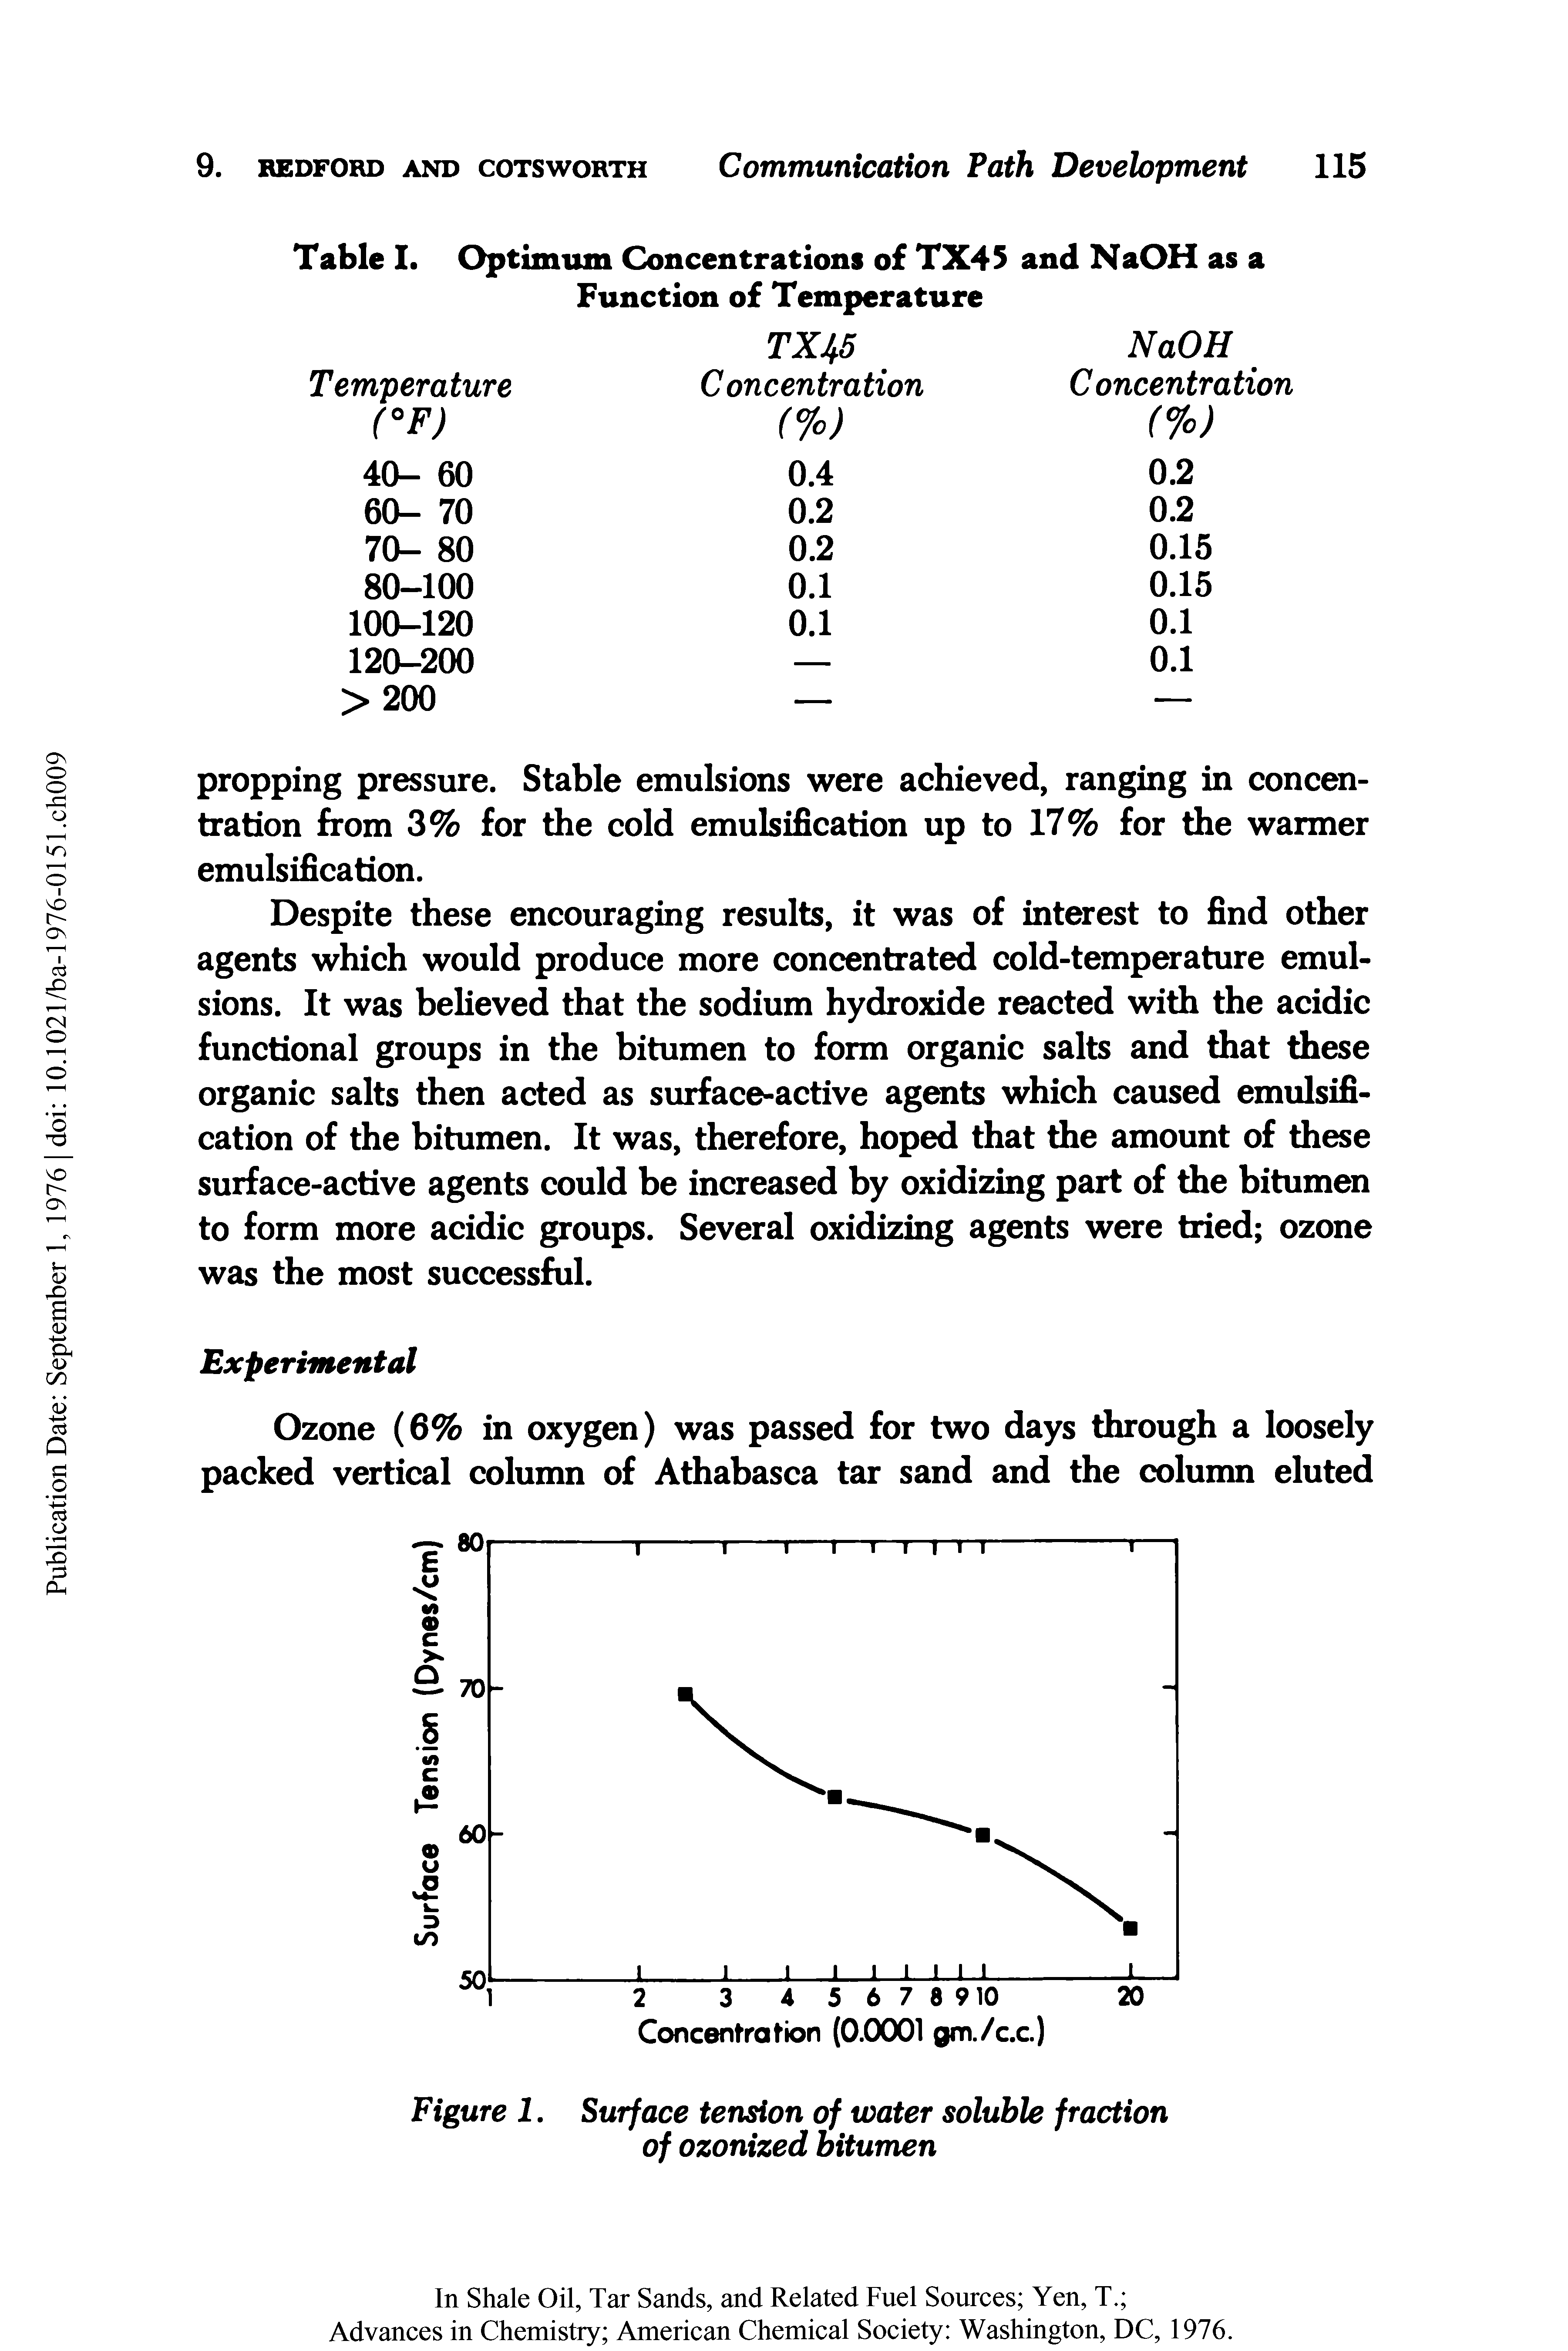 Figure 1. Surface tension of water soluble fraction of ozonized bitumen...